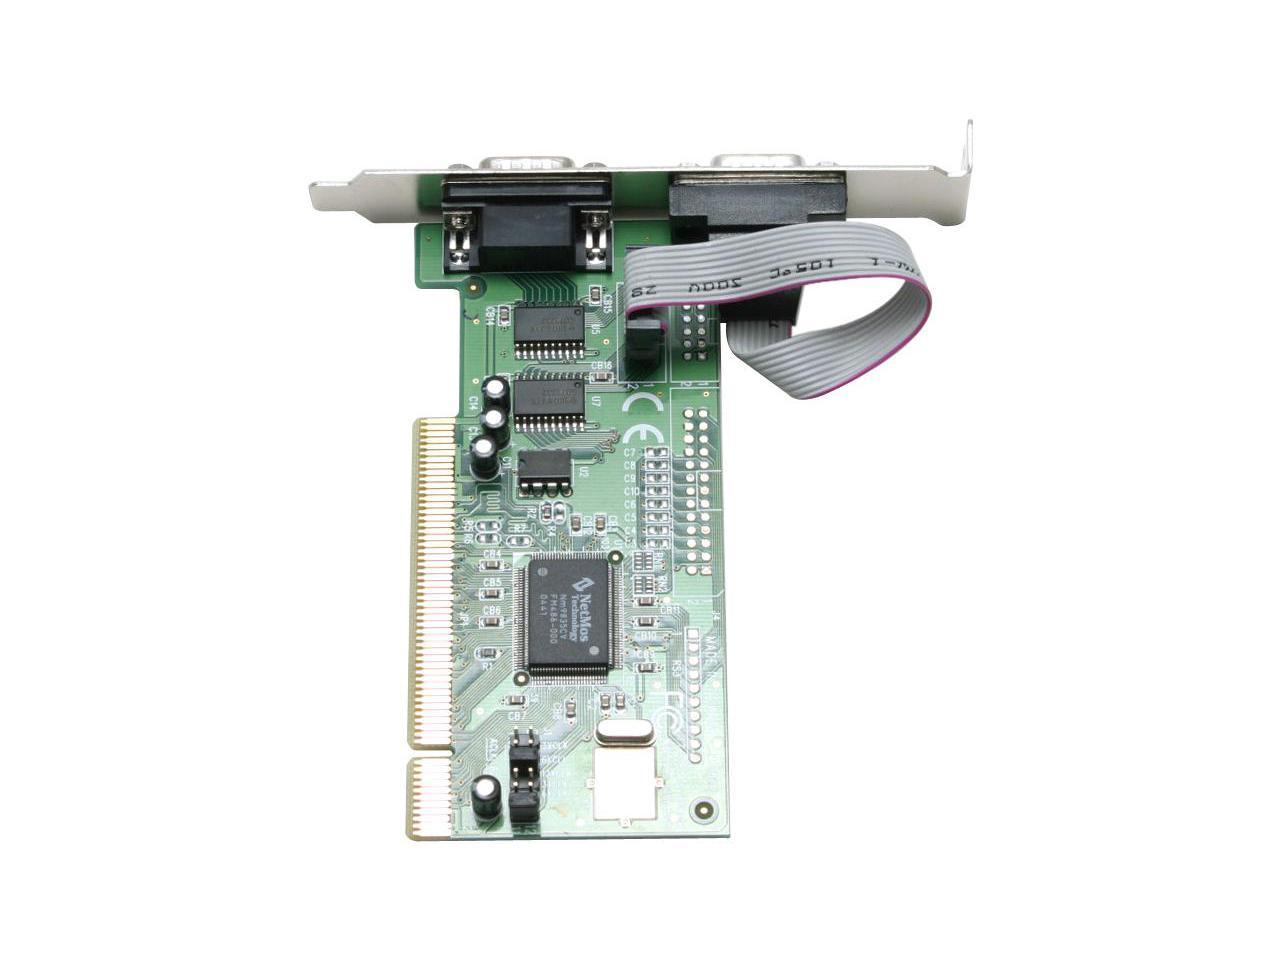 StarTech PCI2S550 2 Port PCI RS232 Serial Adapter Card with 16550 UART